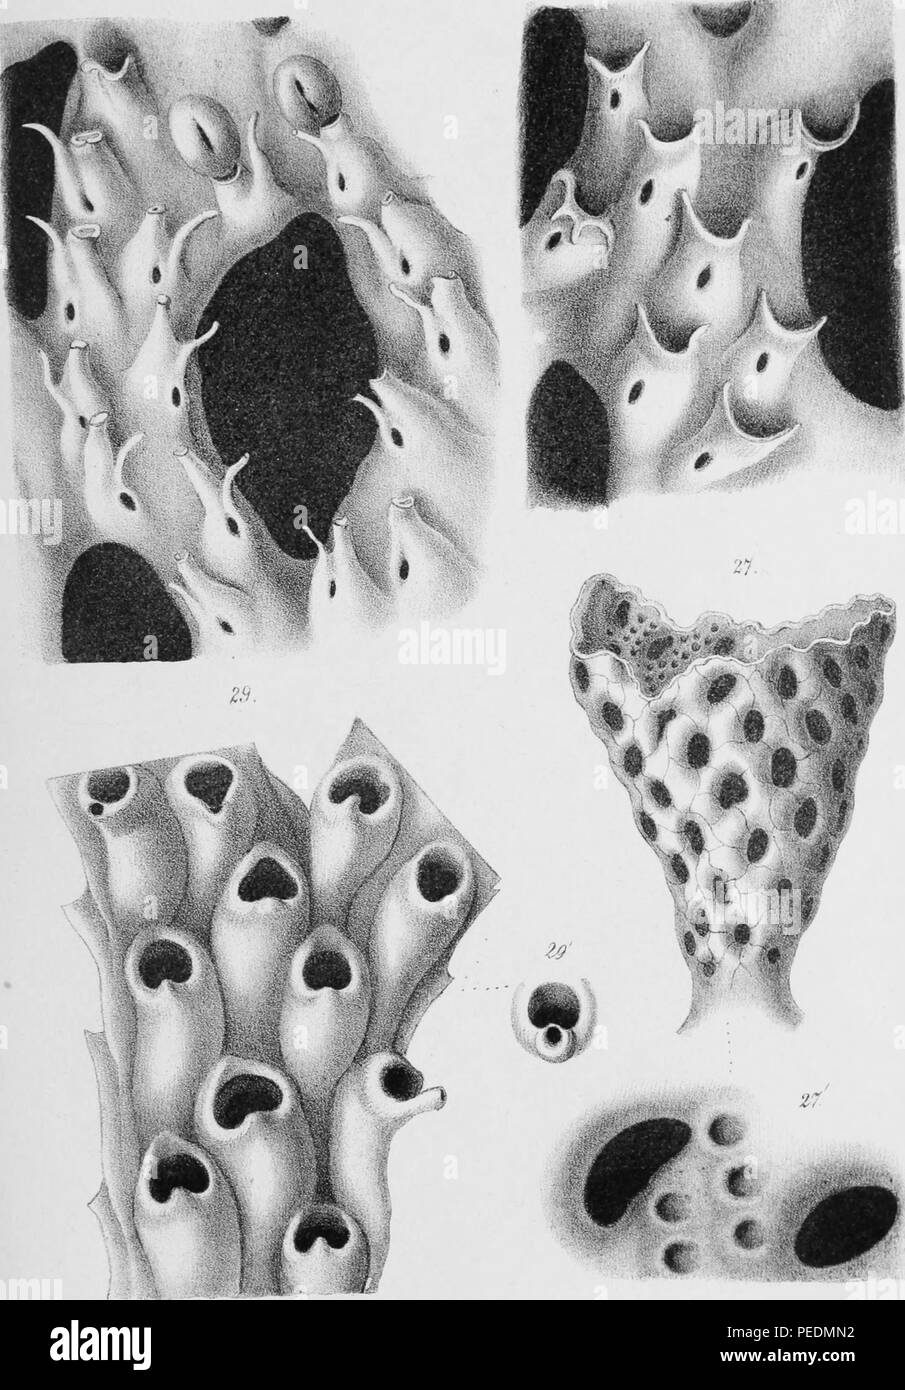 Black and white illustration of several types of bryozoans (entoprocts) aka 'moss animals' a phylum of microscopic, aquatic invertebrates, depicted here are Retepara Cellulosa Lame and Cellepora Ramulosa Linn, 1861. Courtesy Internet Archive. () Stock Photo